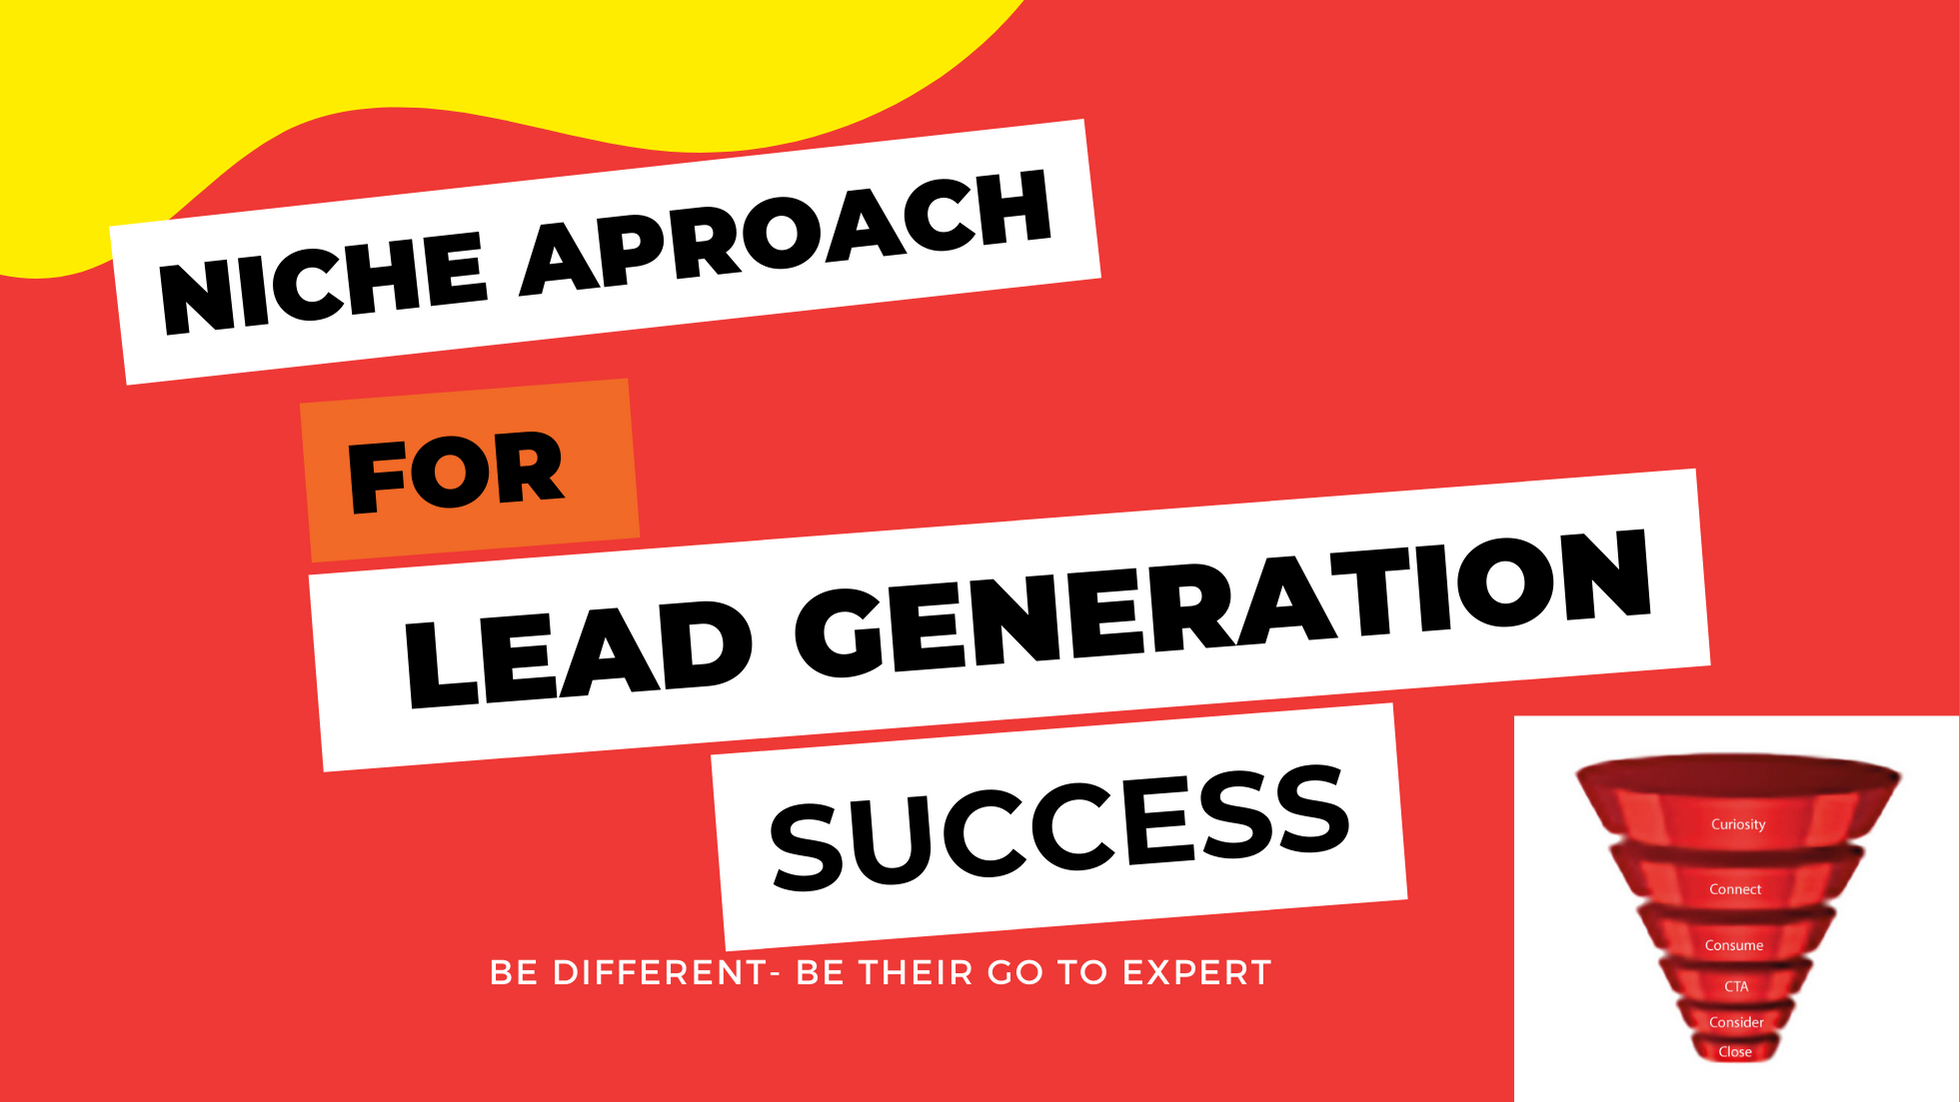 Niche approach for lead generation sucesss and a never ending sales pipeline